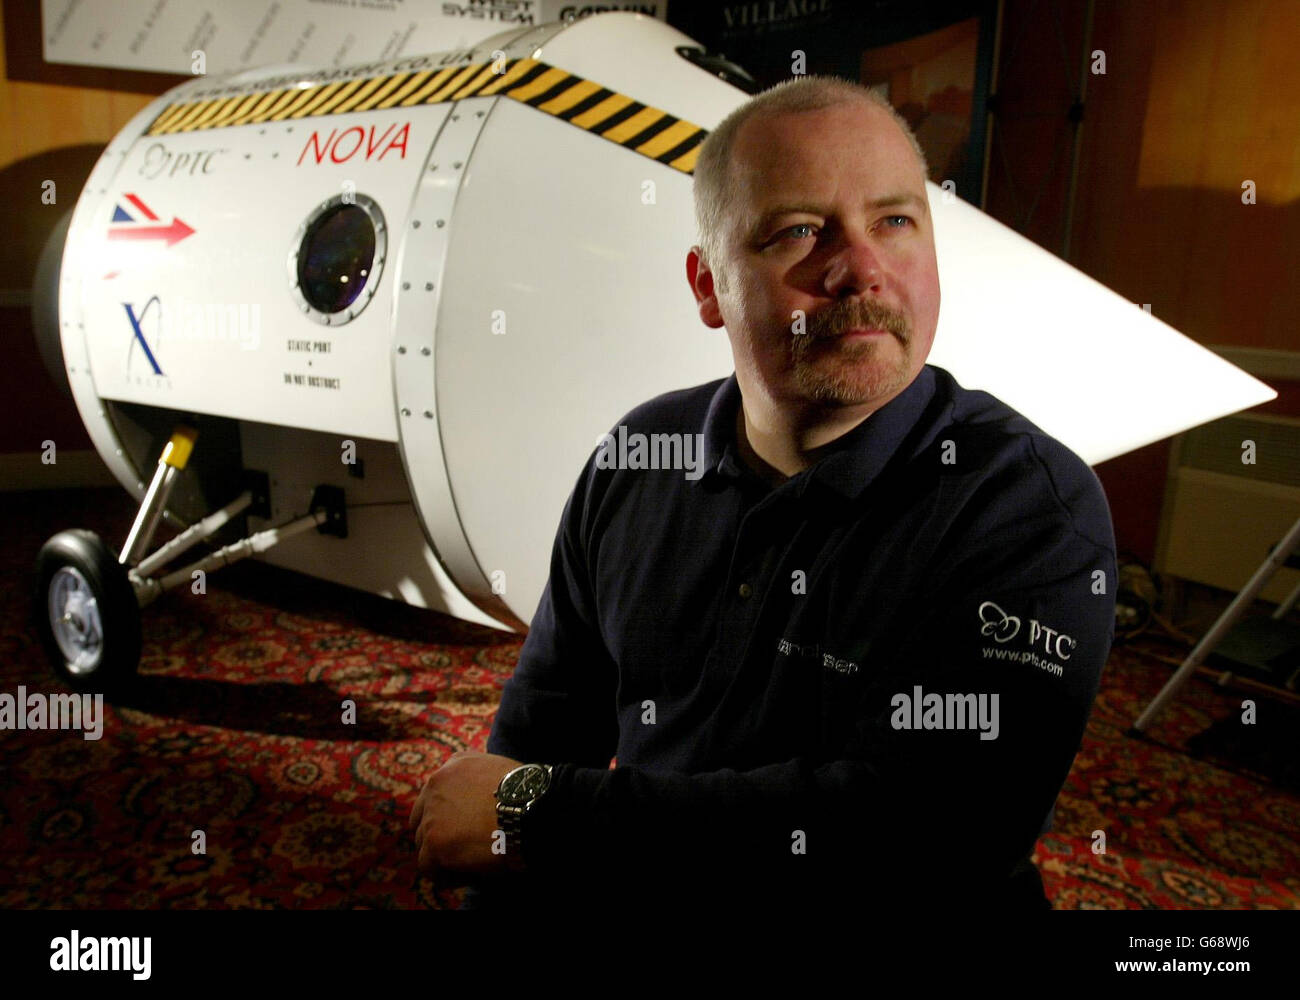 Amateur rocket enthusiast Steve Bennett, 39, from Duckinfield, Greater Manchester, who is hoping to become the first amateur to fly in space in a privately developed craft, sits next to the new Nova II rocket capsule at its launch in Manchester. *...His Starchaser firm today unveiled the single seater capsule, which is being readied for shipment to the US, where it is to be fitted with a parachute system before being tested. *160703*Amateur rocket enthusiast Steve Bennett, 39, from Duckinfield, Greater Manchester. The rocket enthusiast is hoping to become the first amateur to fly into space Stock Photo